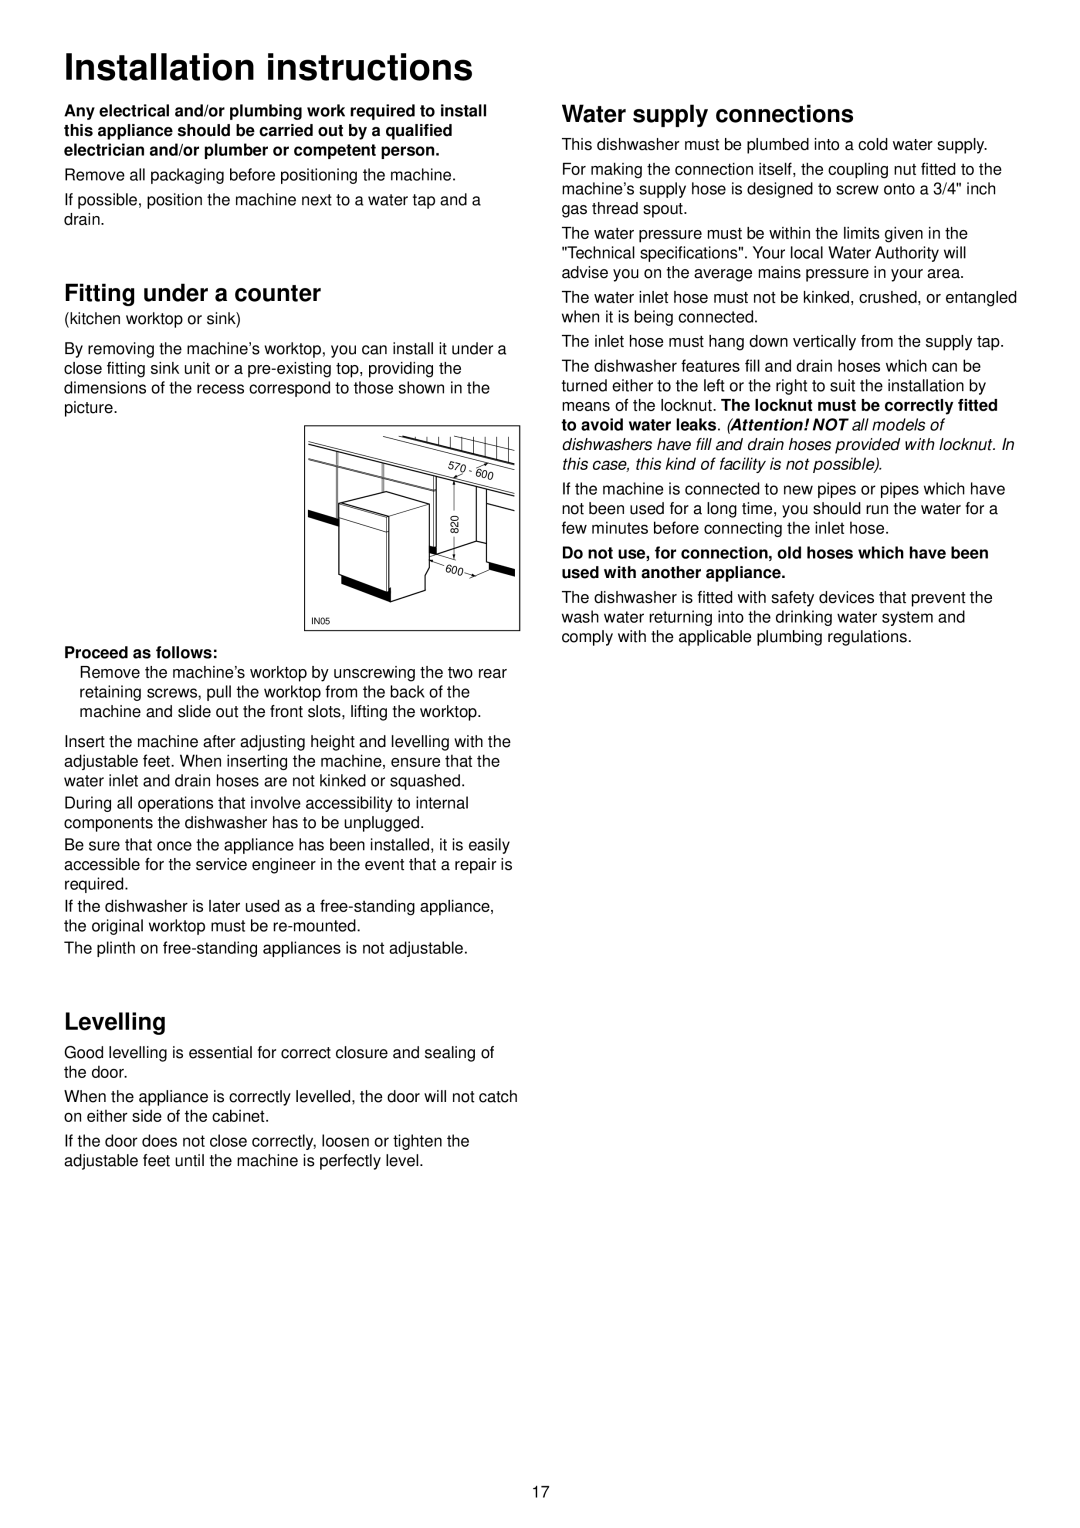 Tricity Bendix BDW 55 manual Installation instructions, Fitting under a counter, Levelling, Water supply connections 